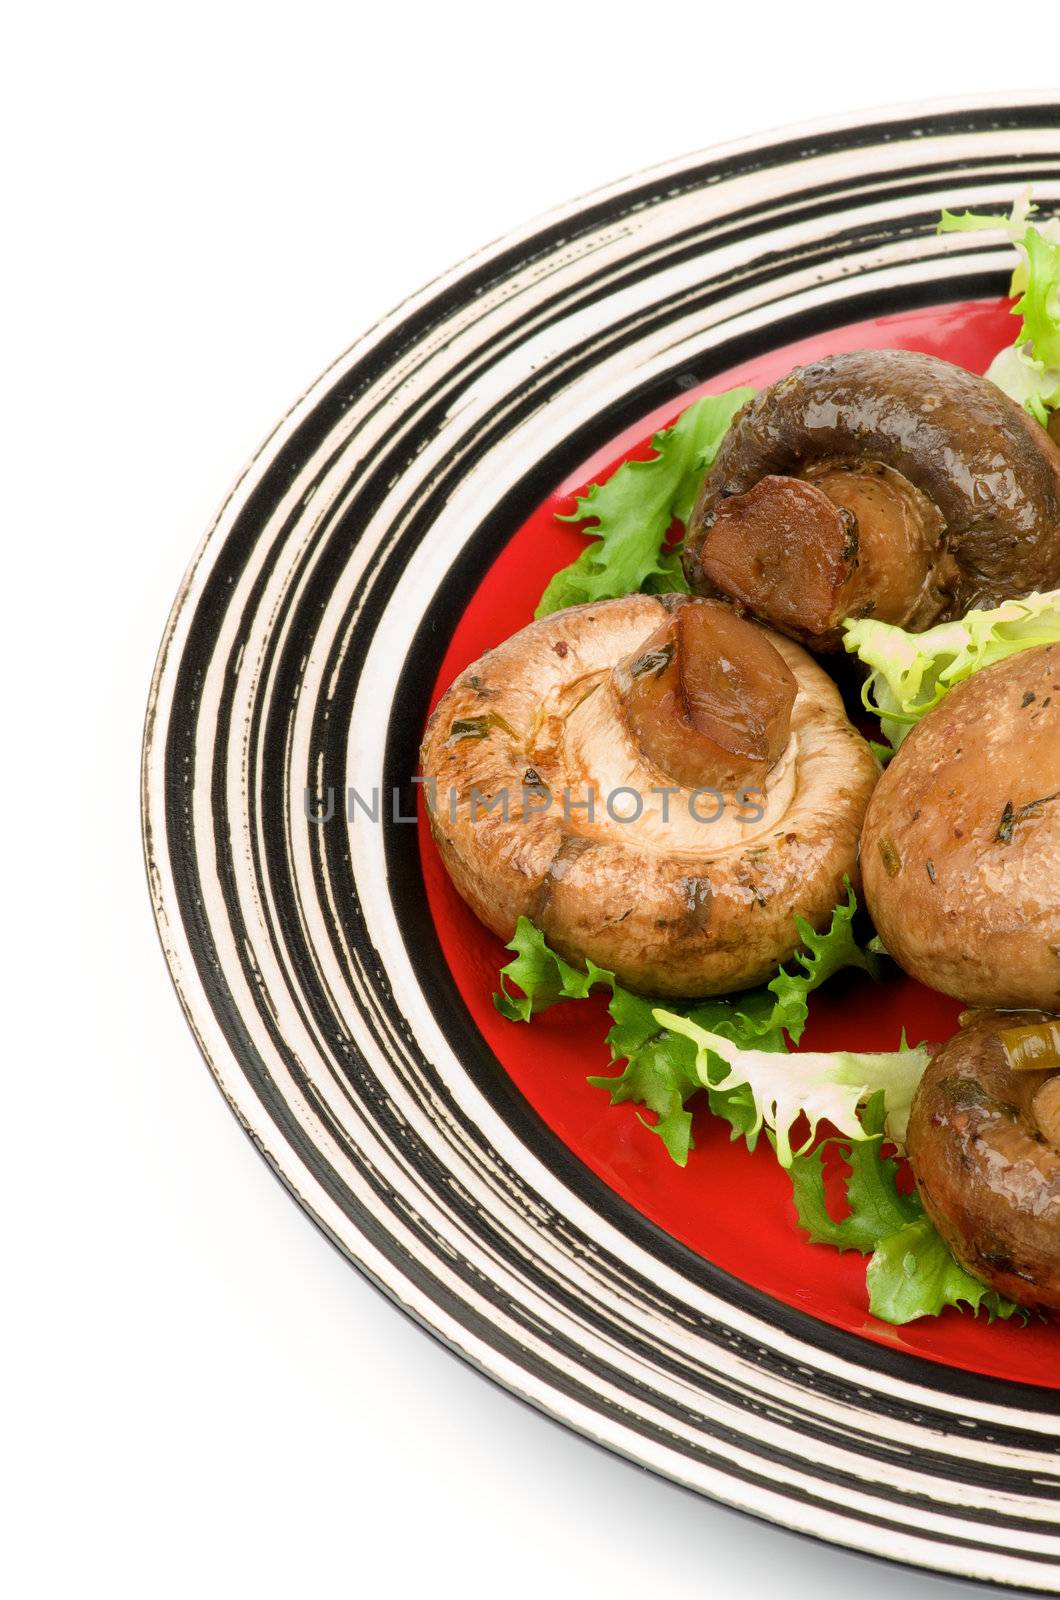 Roasted Champignon Mushrooms with Greens on Red Plate cross section isolated on white background